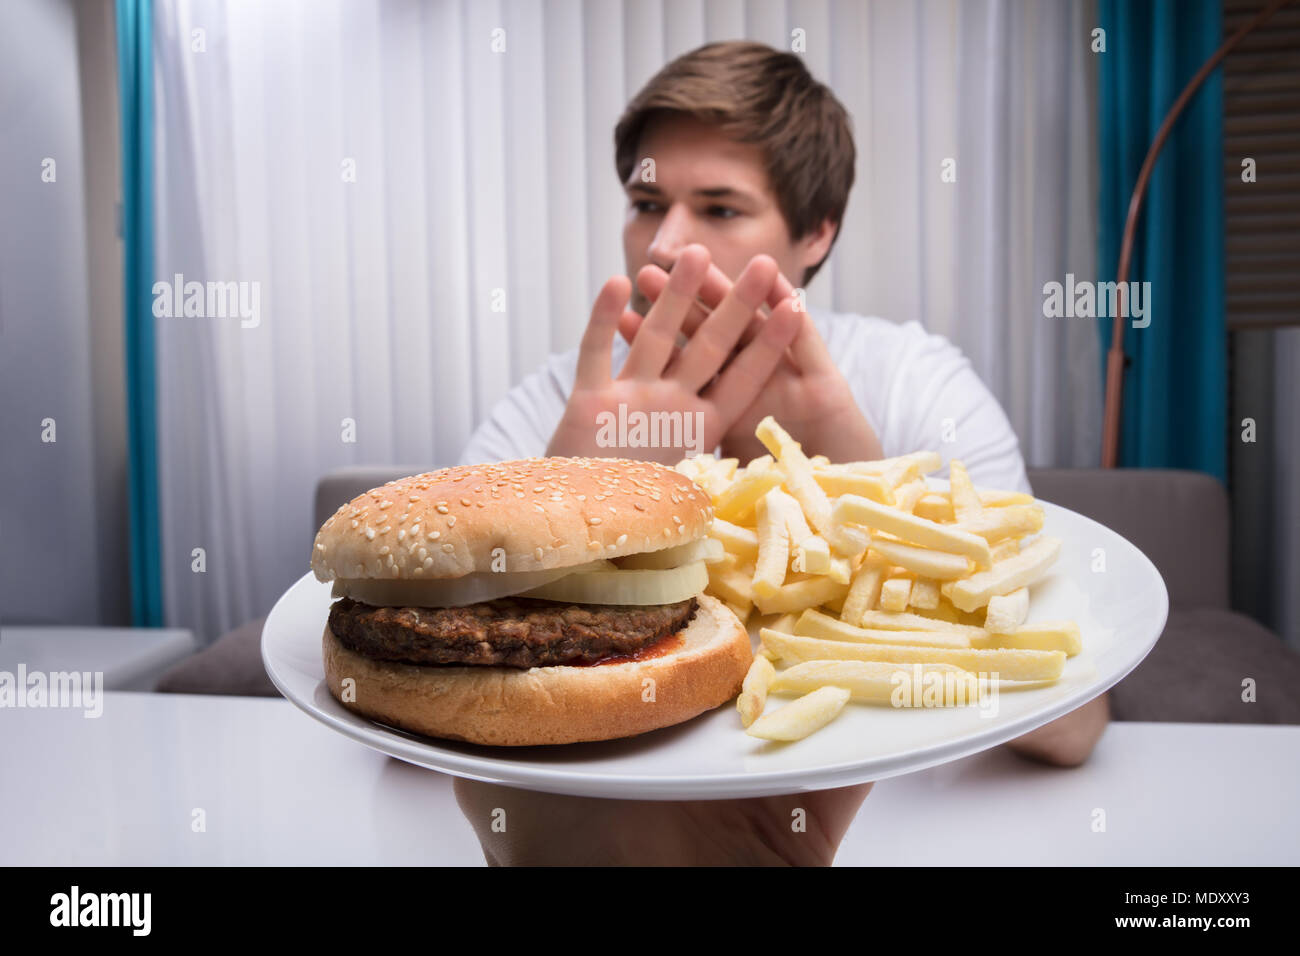 Man Refusing Unhealthy Food Offered By A Person Stock Photo